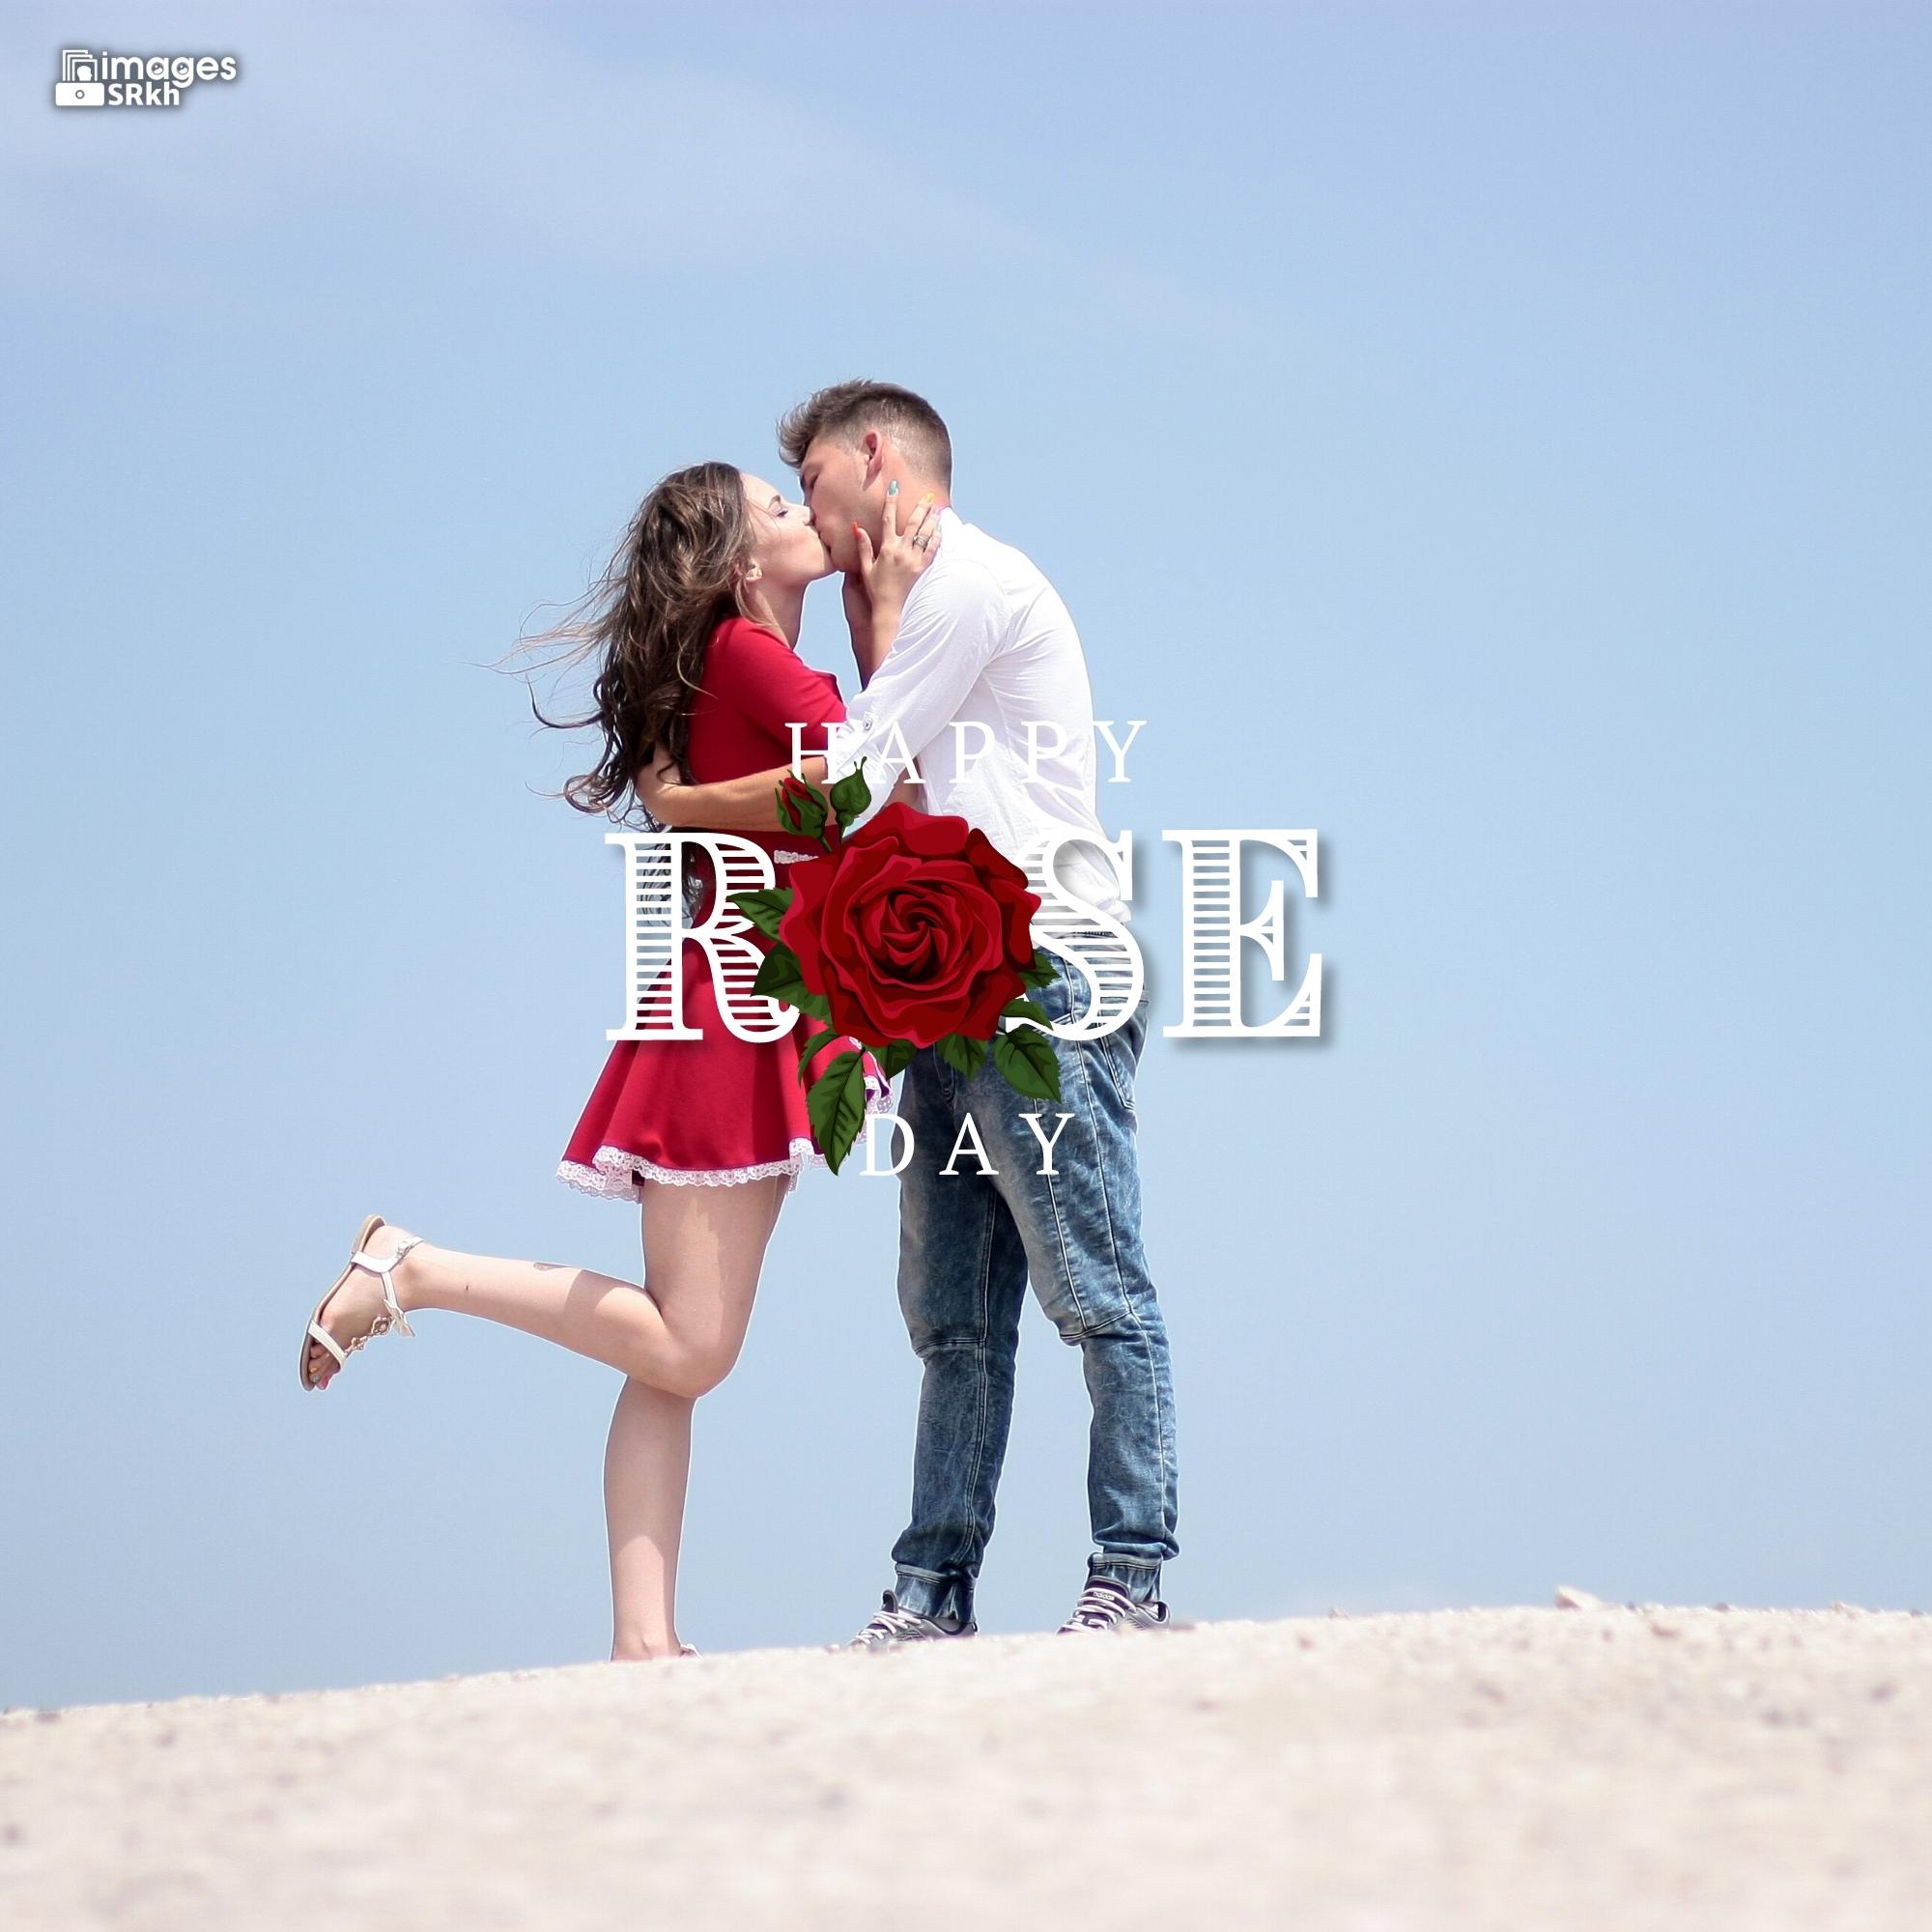 Romantic Rose Day Images Hd Download (21)